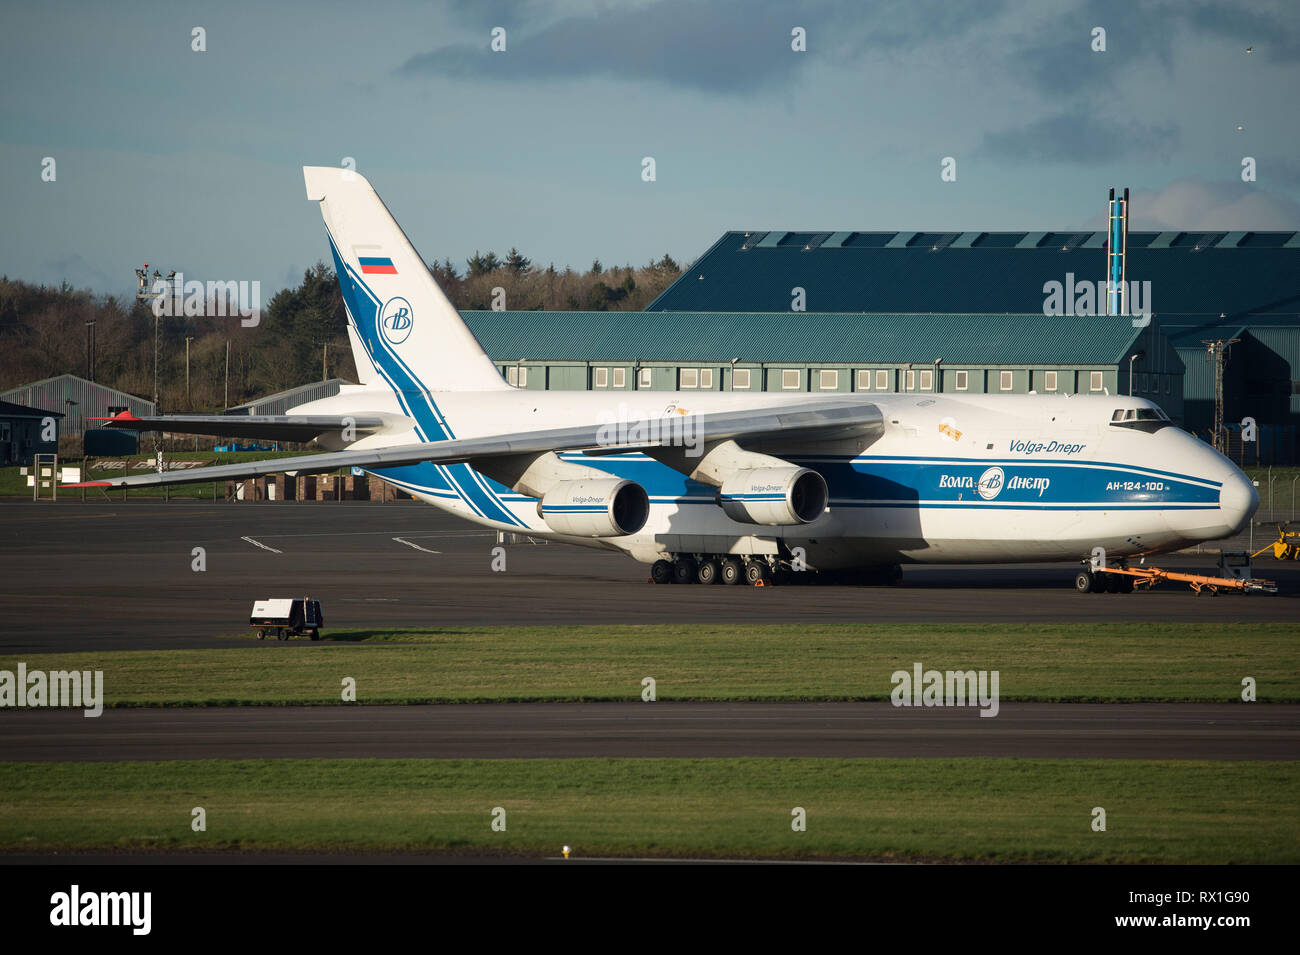 Prestwick, UK. 7 March 2019. The Russian giant, known as the Antanov 124-100 Commercial Transport Aircraft seen at Prestwick International Airport. Stock Photo